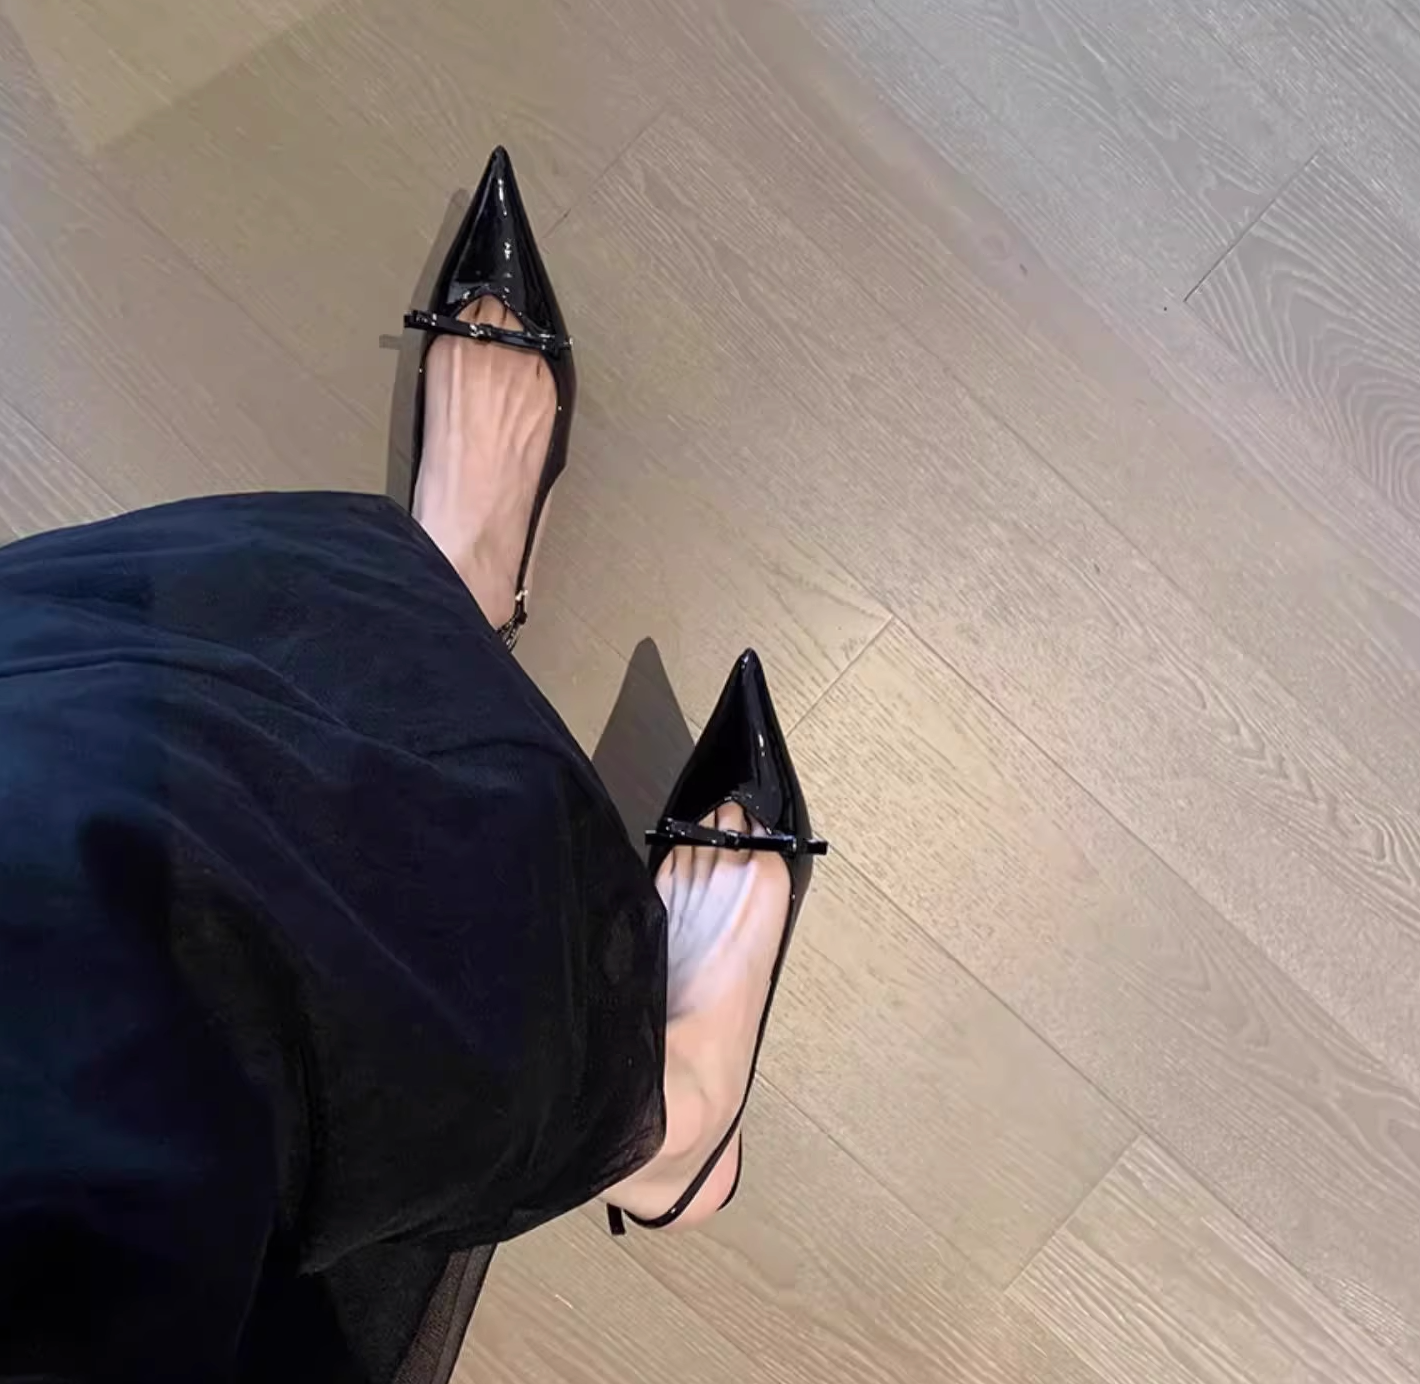 Pointed-Toe Bow Patent Leather Kitten heel Pumps